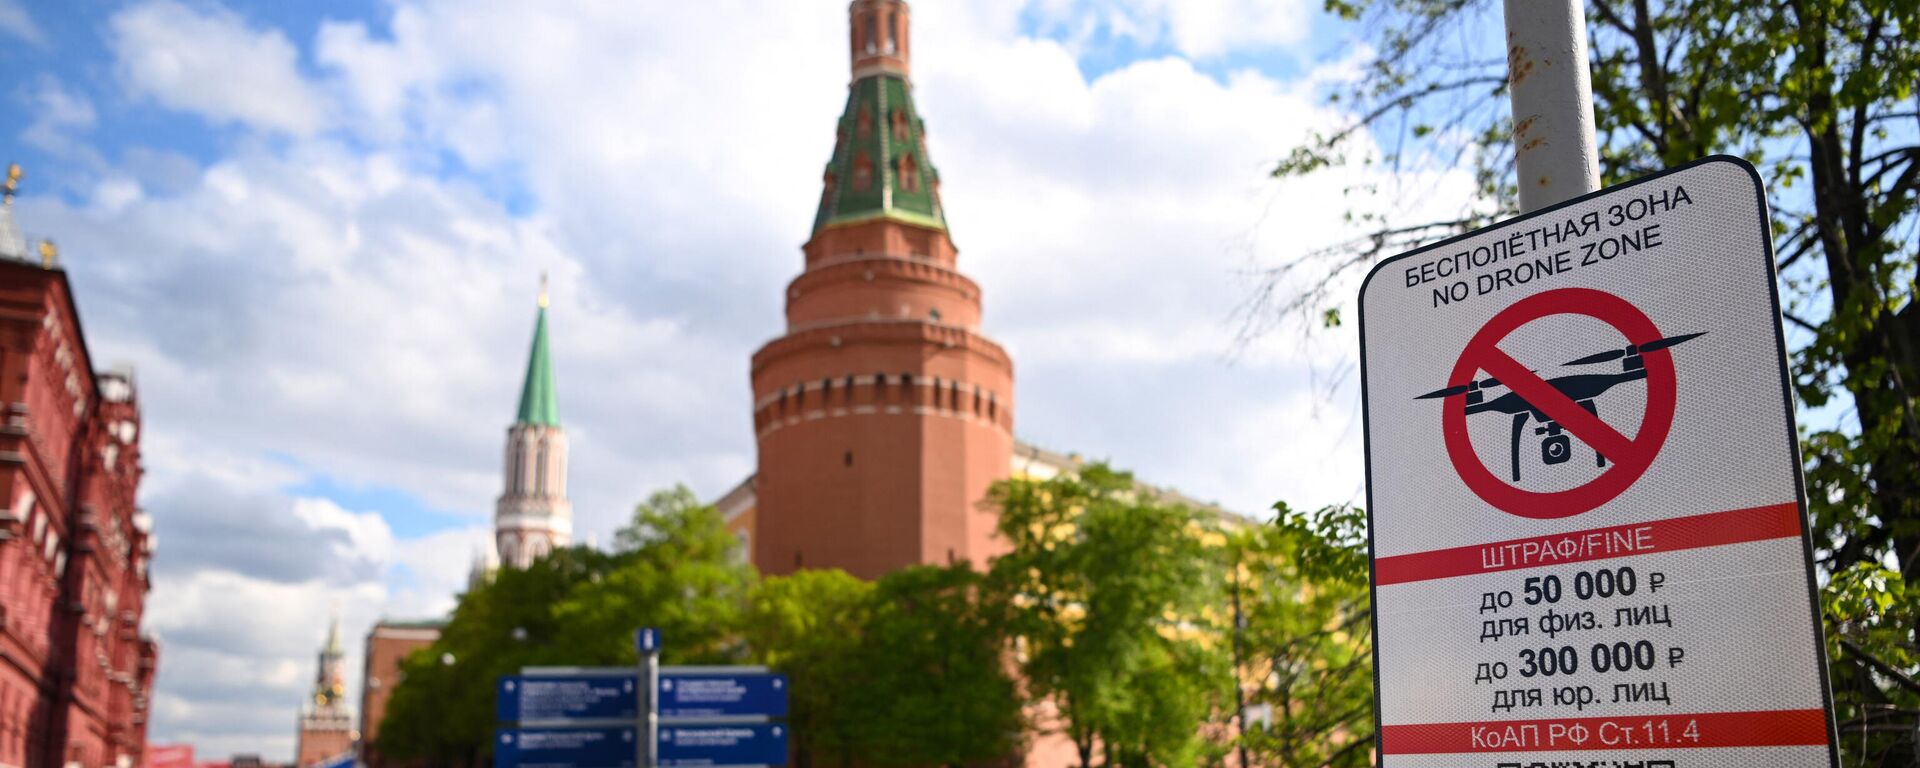 A No Drone Zone sign sits just off the Kremlin in central Moscow as it prohibits unmanned aerial vehicles (drones) flying over the area, on May 3, 2023. - Sputnik International, 1920, 04.05.2023